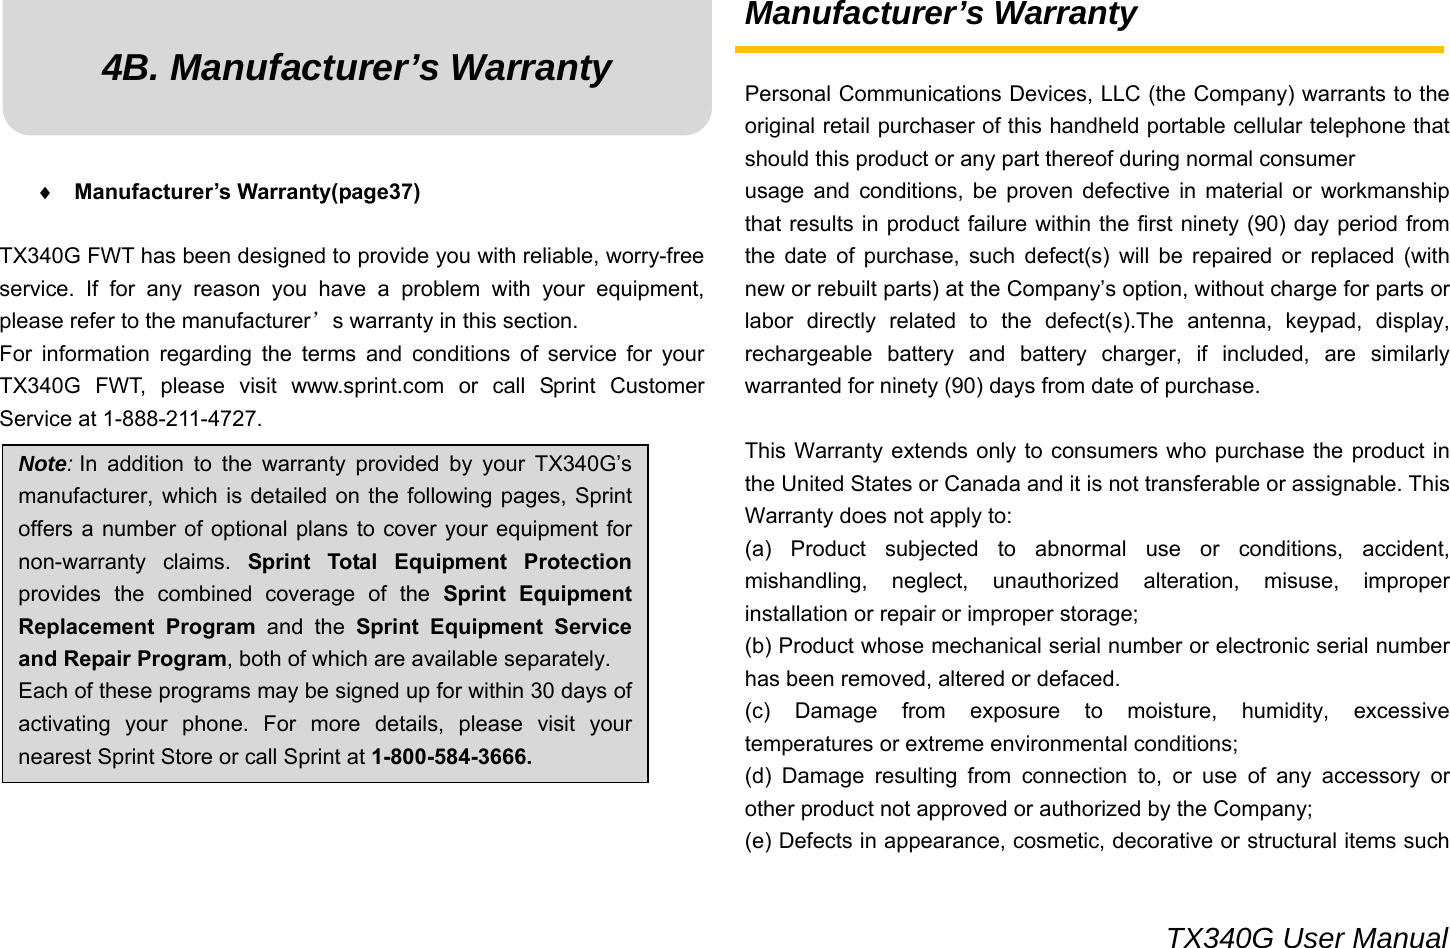                                                                                 TX340G User Manual 4B. Manufacturer’s Warranty      ♦ Manufacturer’s Warranty(page37)  TX340G FWT has been designed to provide you with reliable, worry-free service. If for any reason you have a problem with your equipment, please refer to the manufacturer’s warranty in this section. For information regarding the terms and conditions of service for your TX340G FWT, please visit www.sprint.com or call Sprint Customer Service at 1-888-211-4727.            Manufacturer’s Warranty  Personal Communications Devices, LLC (the Company) warrants to the original retail purchaser of this handheld portable cellular telephone that should this product or any part thereof during normal consumer usage and conditions, be proven defective in material or workmanship that results in product failure within the first ninety (90) day period from the date of purchase, such defect(s) will be repaired or replaced (with new or rebuilt parts) at the Company’s option, without charge for parts or labor directly related to the defect(s).The antenna, keypad, display, rechargeable battery and battery charger, if included, are similarly warranted for ninety (90) days from date of purchase.    This Warranty extends only to consumers who purchase the product in the United States or Canada and it is not transferable or assignable. This Warranty does not apply to: (a) Product subjected to abnormal use or conditions, accident, mishandling, neglect, unauthorized alteration, misuse, improper installation or repair or improper storage; (b) Product whose mechanical serial number or electronic serial number has been removed, altered or defaced. (c) Damage from exposure to moisture, humidity, excessive temperatures or extreme environmental conditions; (d) Damage resulting from connection to, or use of any accessory or other product not approved or authorized by the Company; (e) Defects in appearance, cosmetic, decorative or structural items such Note: In addition to the warranty provided by your TX340G’s manufacturer, which is detailed on the following pages, Sprint offers a number of optional plans to cover your equipment for non-warranty claims. Sprint Total Equipment Protection provides the combined coverage of the Sprint Equipment Replacement Program and the Sprint Equipment Service and Repair Program, both of which are available separately. Each of these programs may be signed up for within 30 days of activating your phone. For more details, please visit your nearest Sprint Store or call Sprint at 1-800-584-3666. 